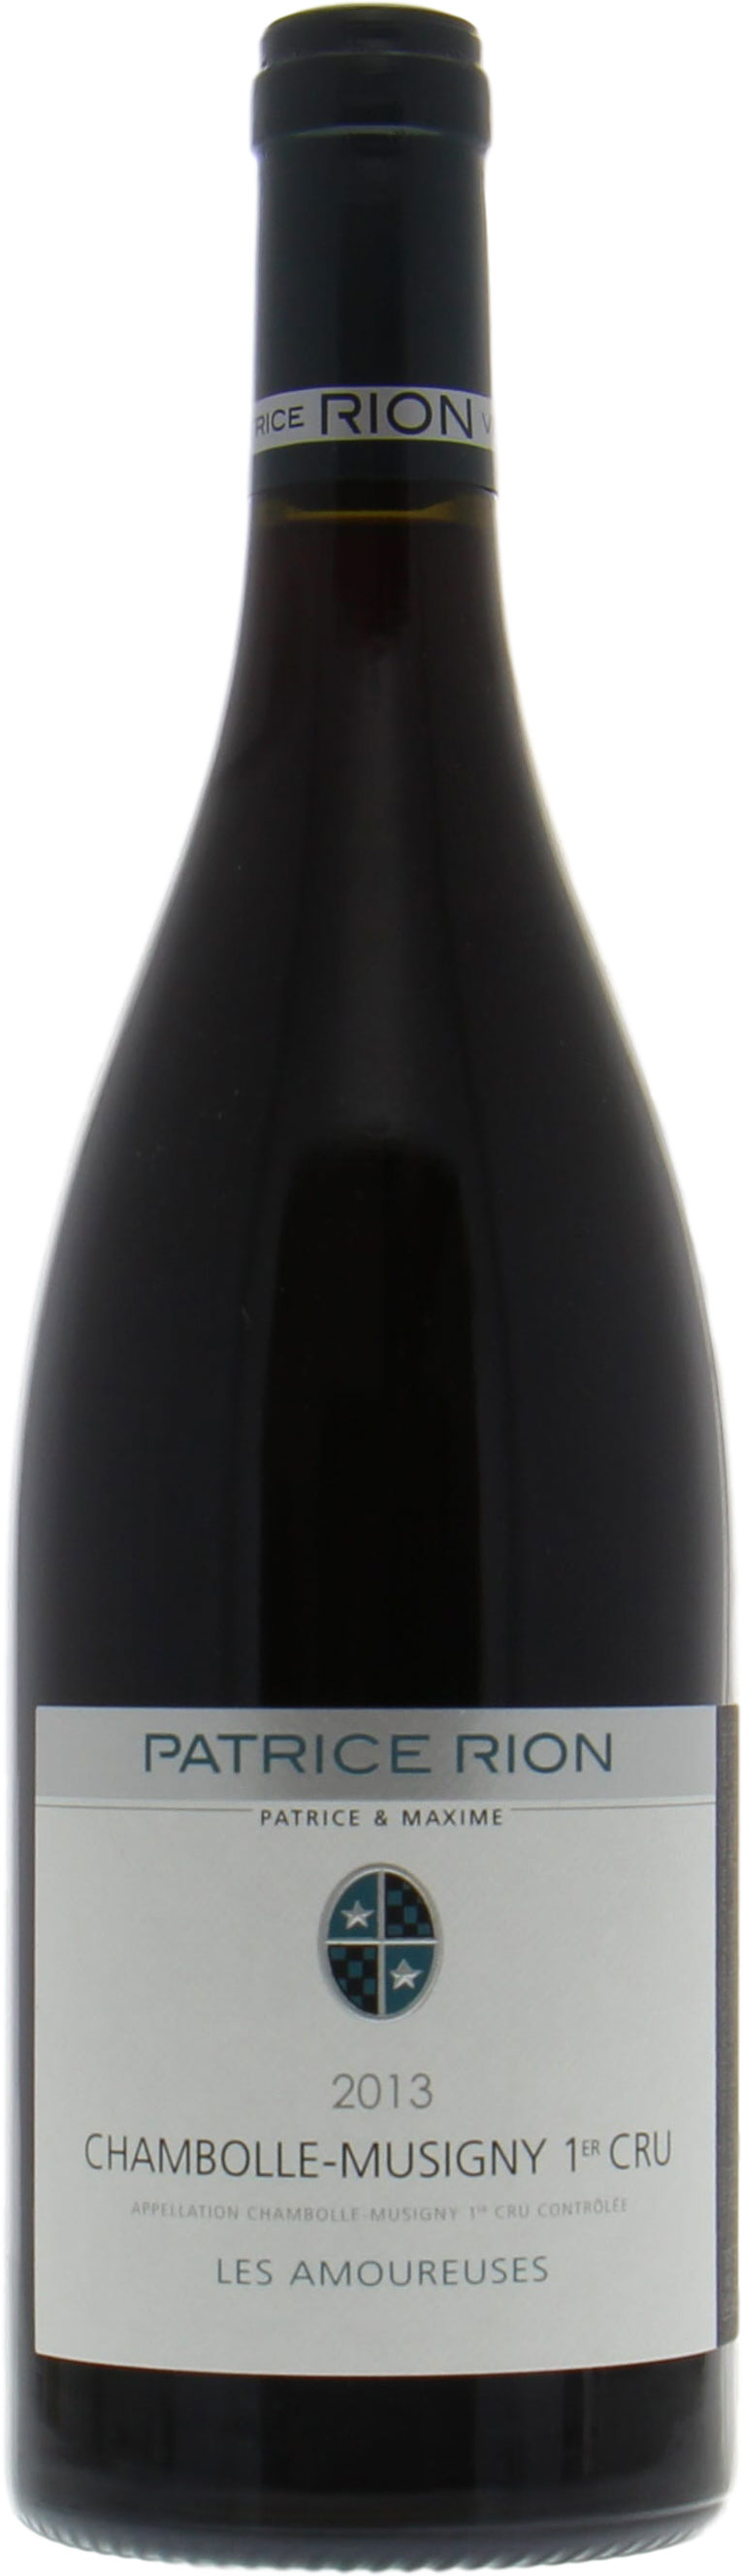 Patrice Rion - Chambolle Musigny 1er Cru les Amoureuses 2013 Perfect